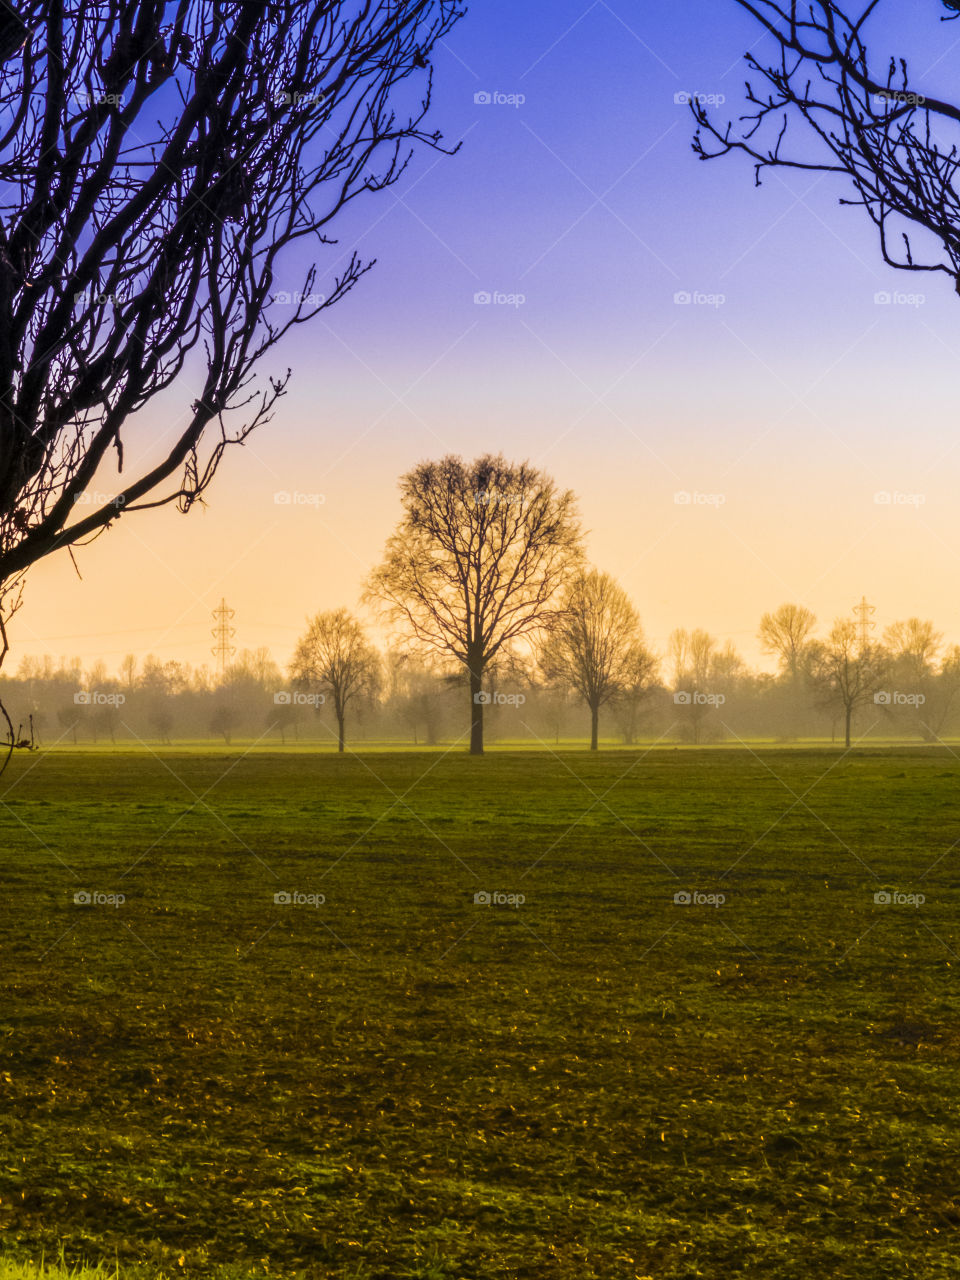 View of the countryside during a winter sunrise, fog, trees, yellow, sky, green, orange, vertical landscape, art, one tree in Milano district, Lombardy, Italy.